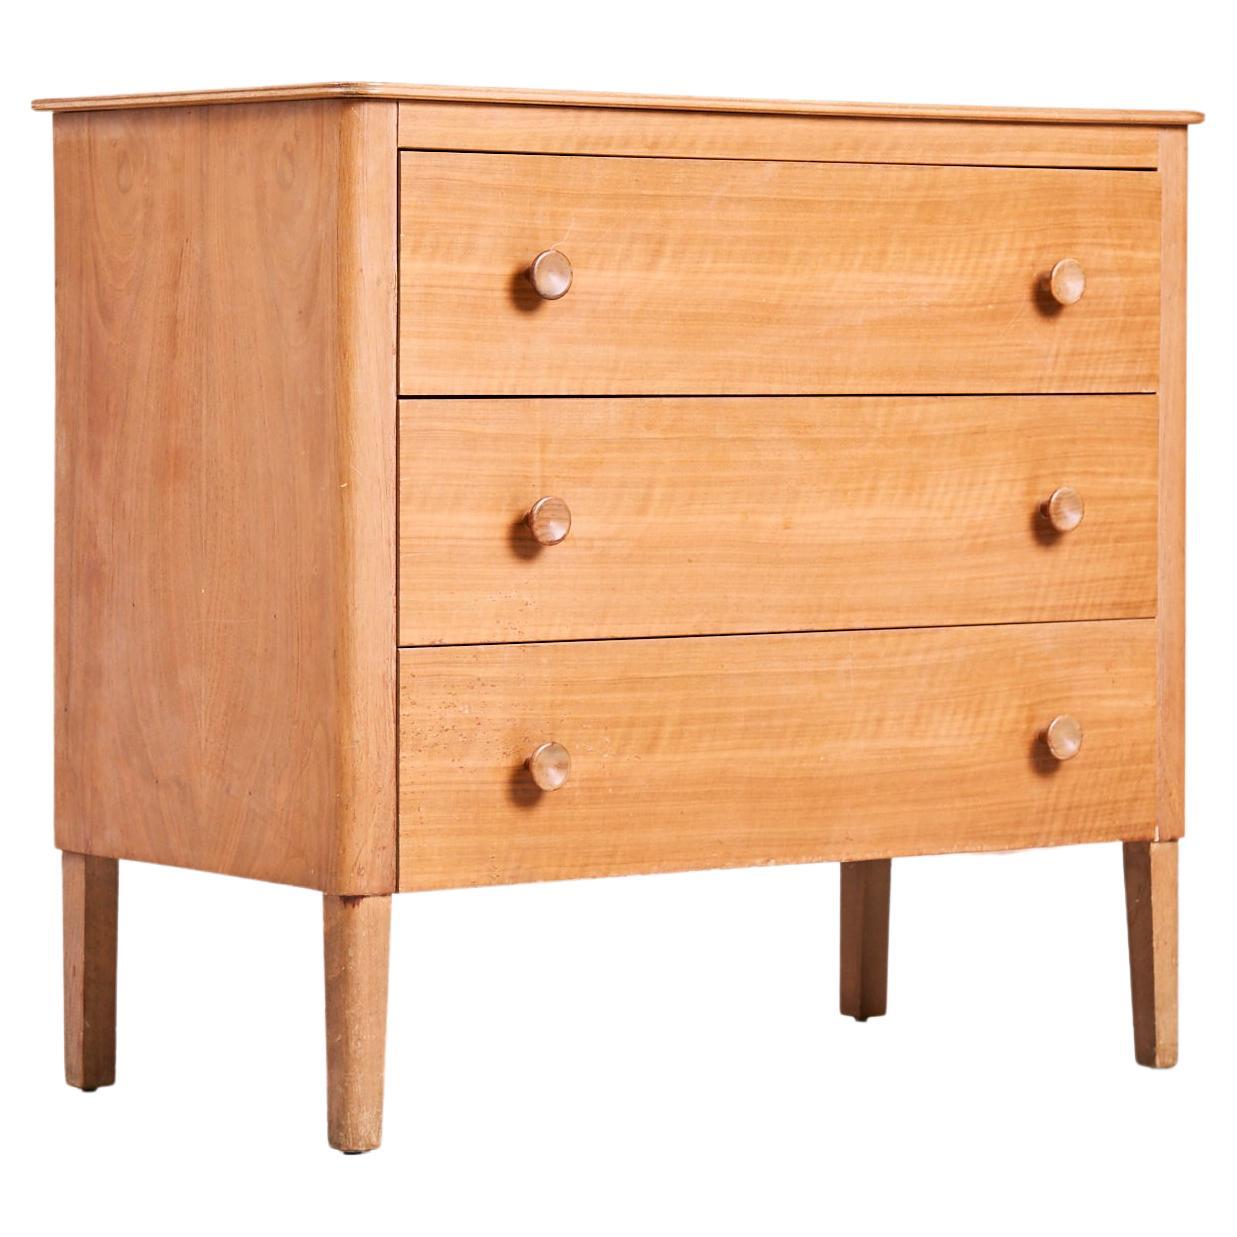 Vintage Midcentury Walnut Chest of Drawers by Gordon Russell for Heal's